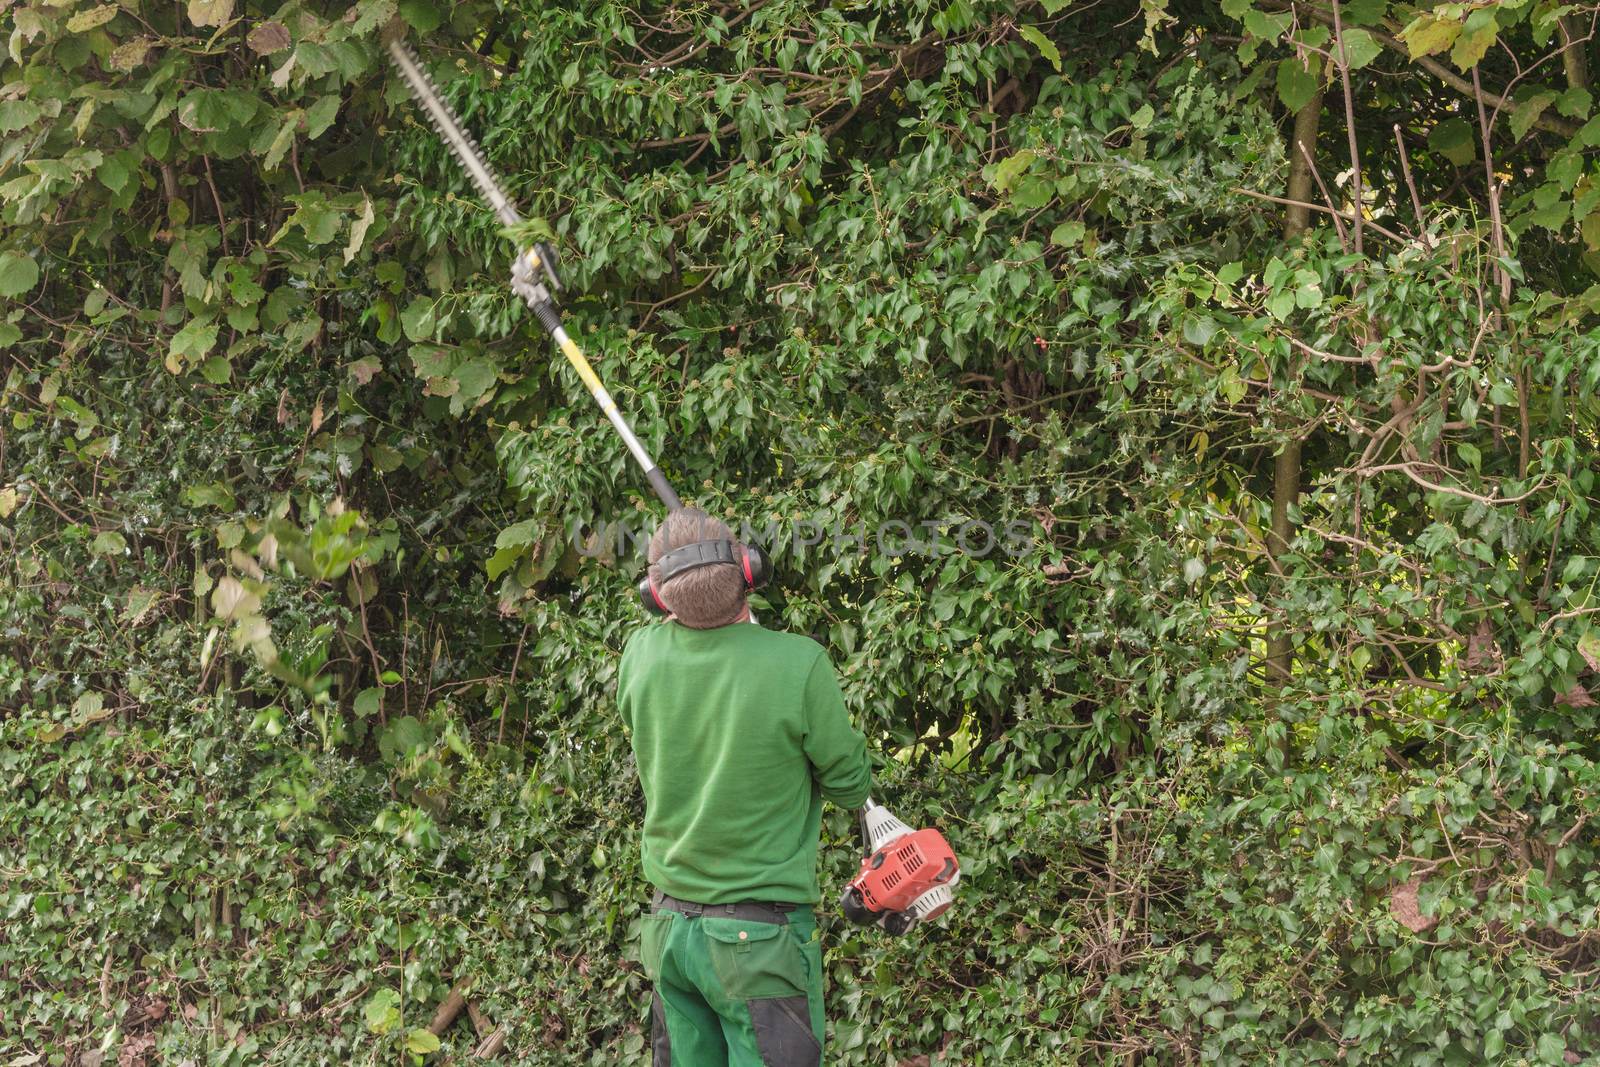 Cutting a hedge with engine hedge trimmer. by JFsPic